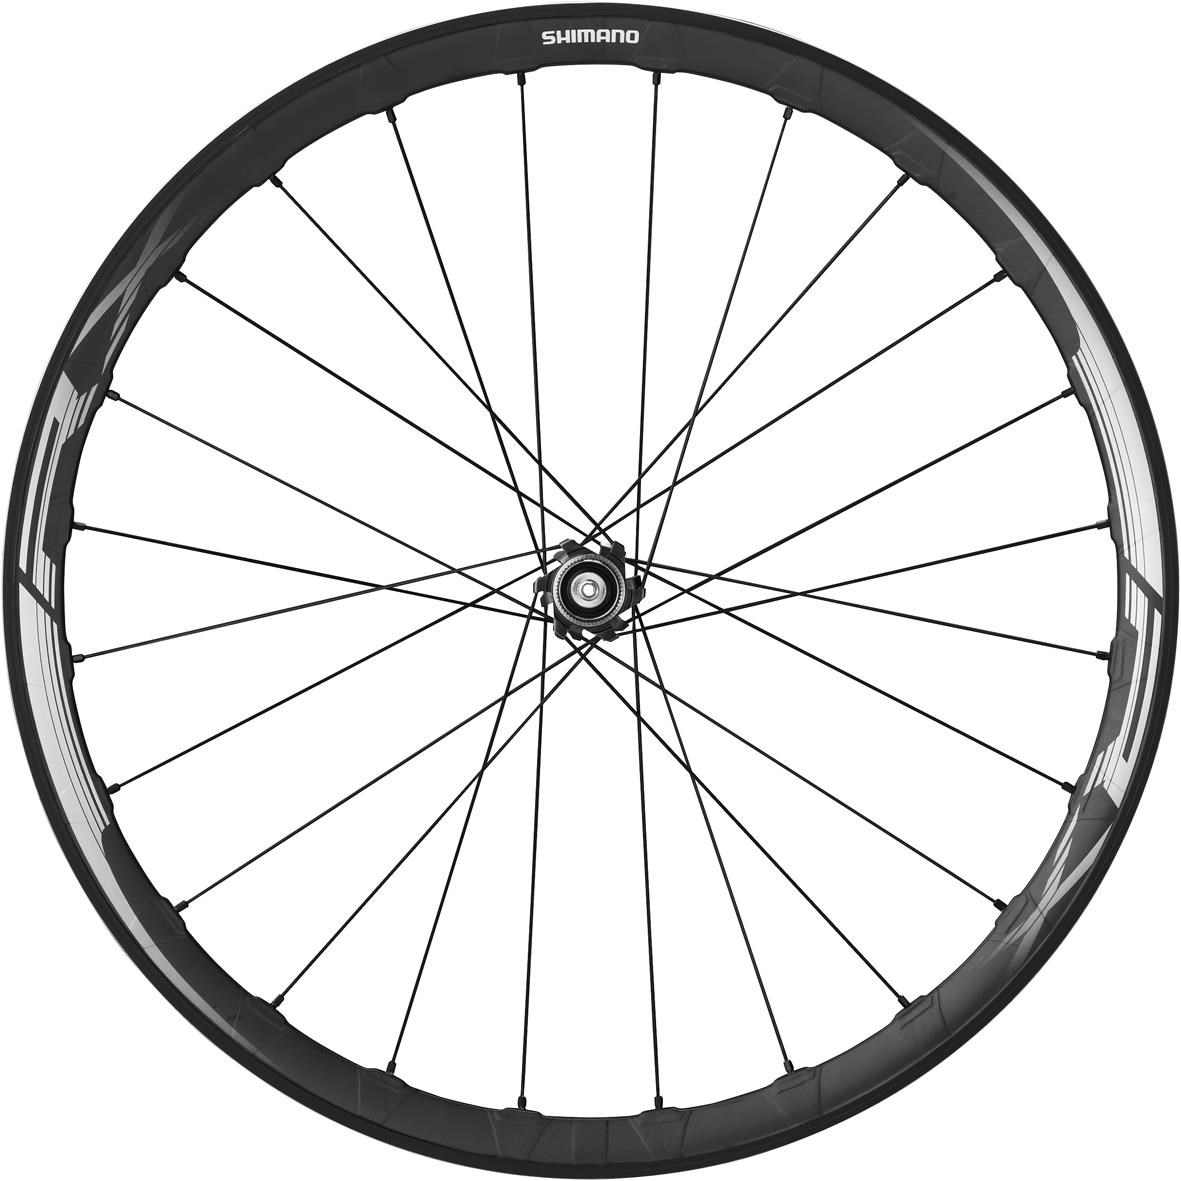 Shimano WH-RX830 Disc Road Wheel - Tubeless Ready Clincher 35 mm - Front